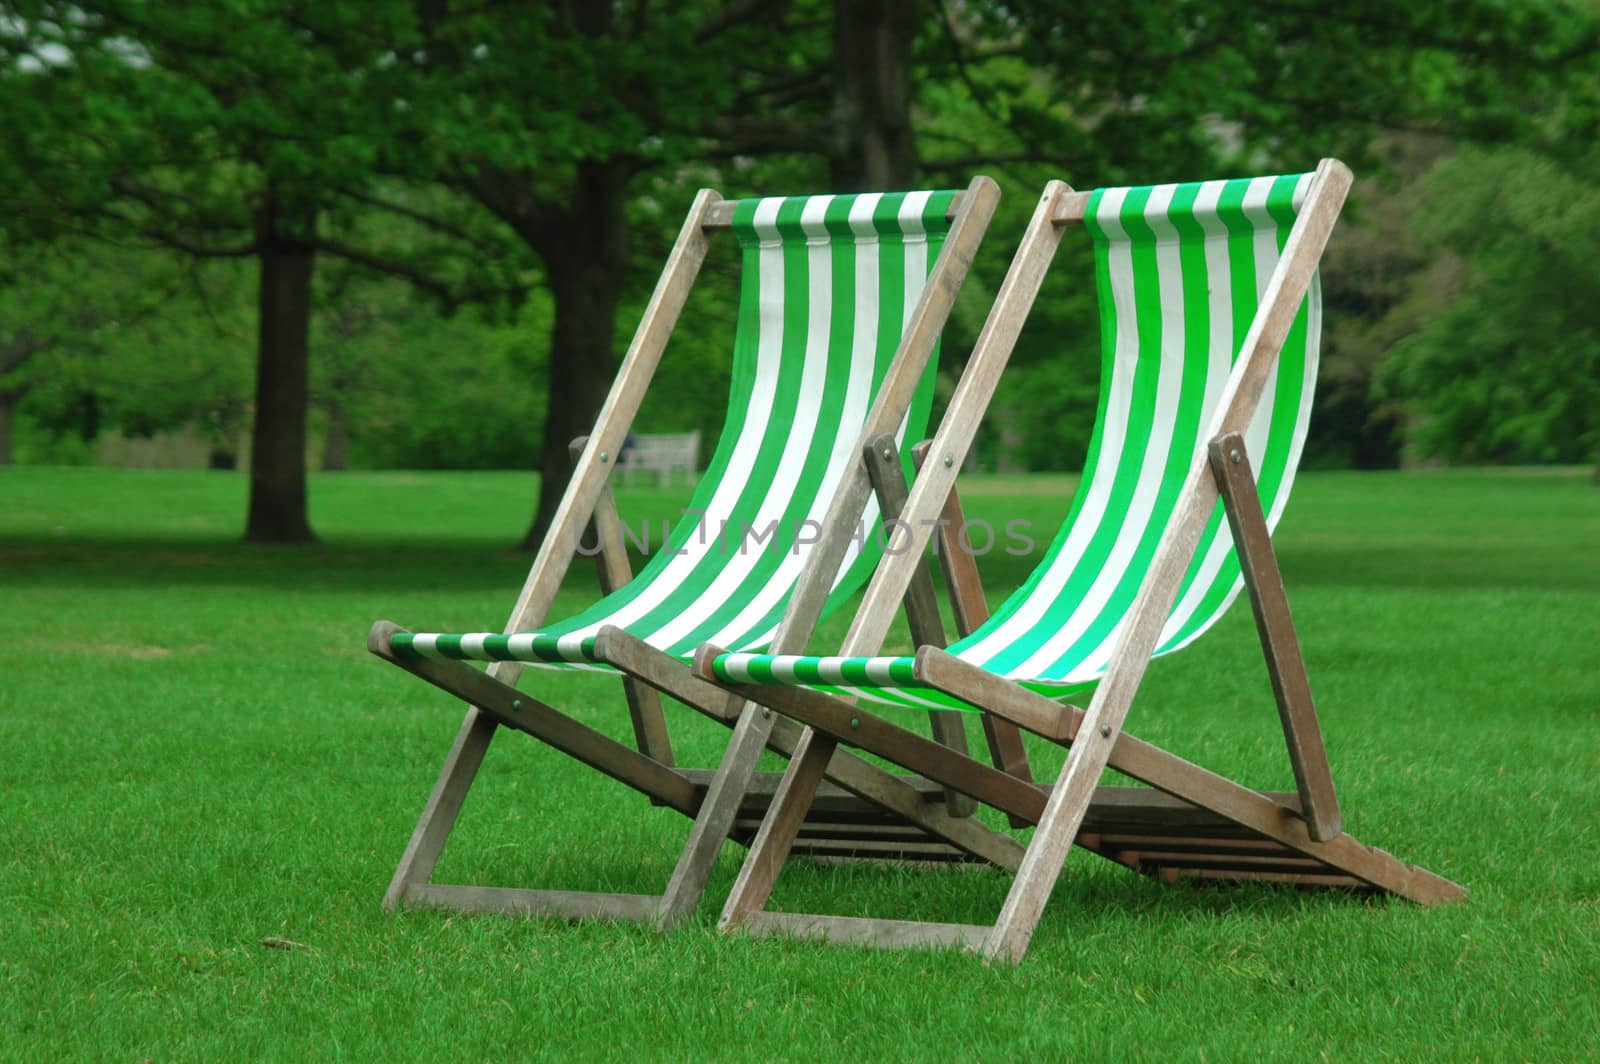 Two white and green chairs in the park